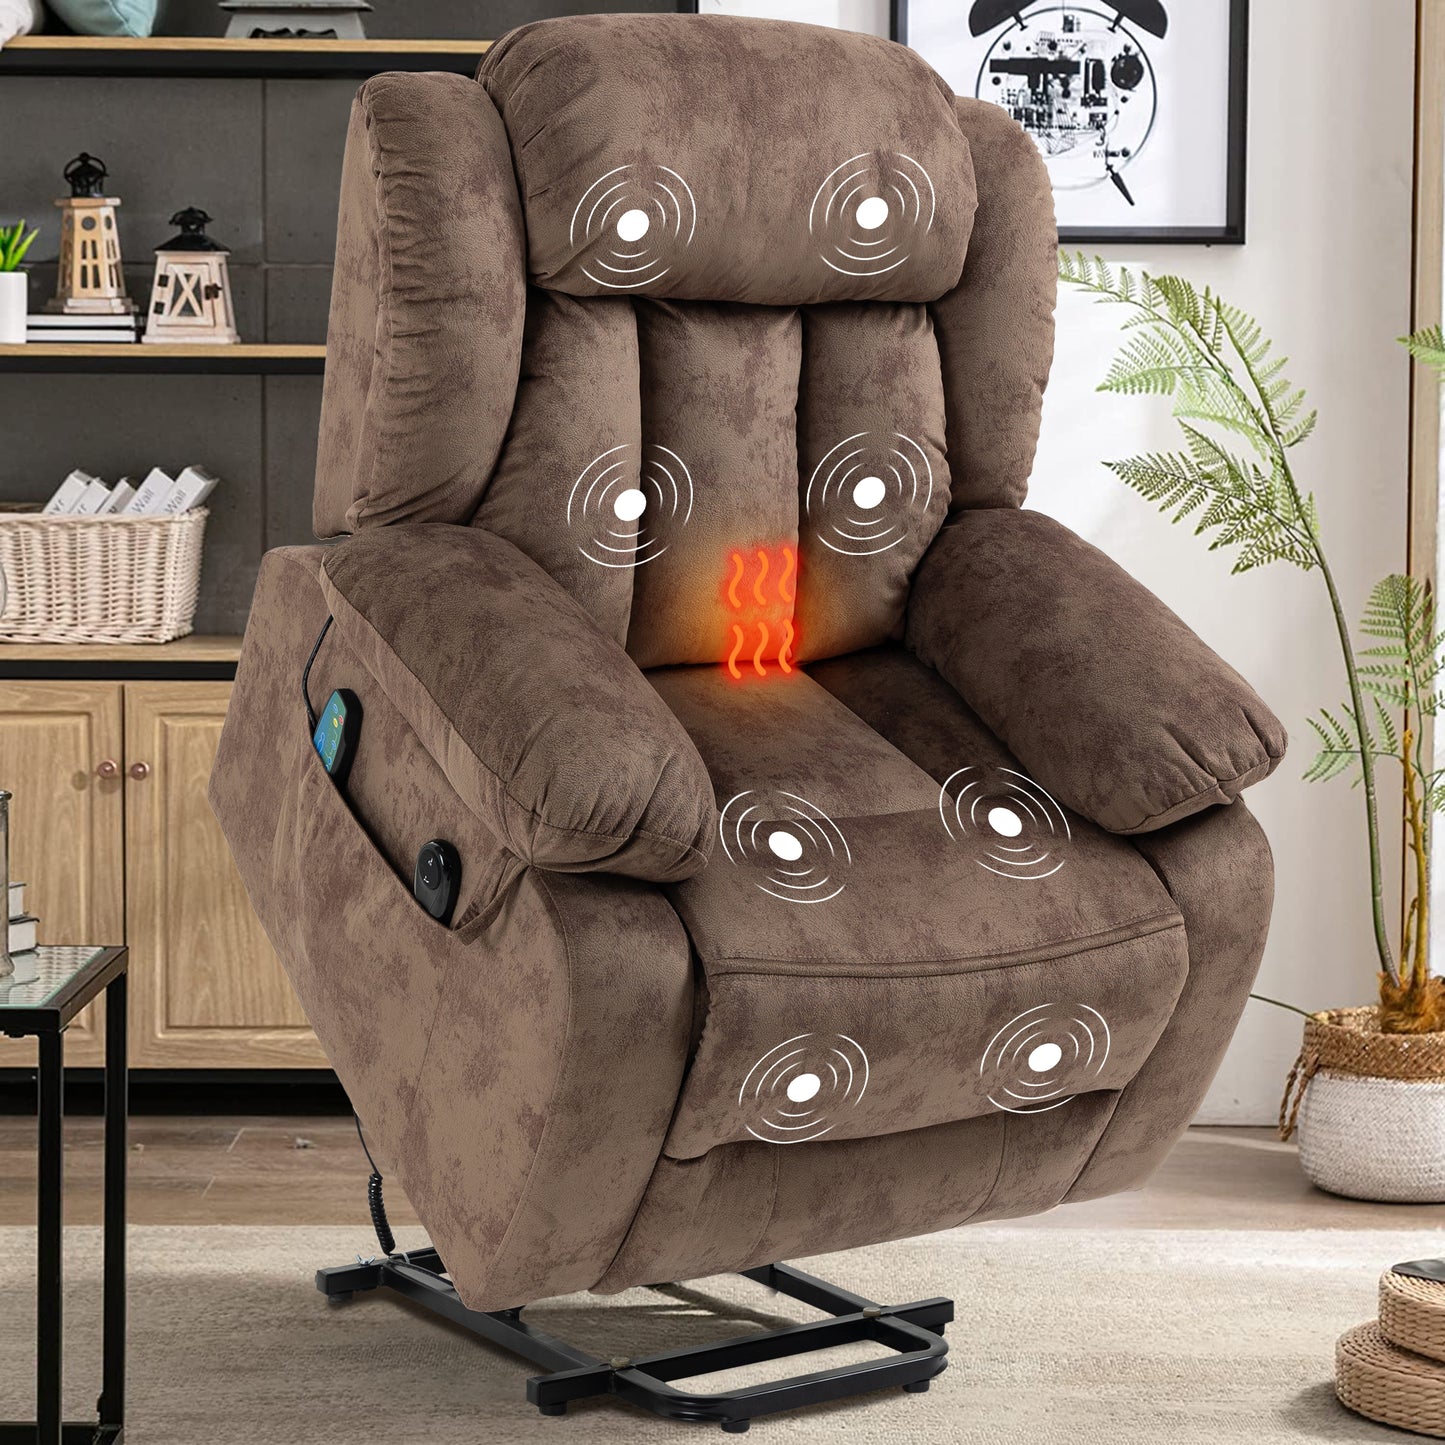 Massage Recliner Chair with Heat Function Electric Lift Chair Recliner Fabric Single Sofa Heavy Duty Living Room Bedroom Furniture Reclining Chair, Large Side Pocket, Brown